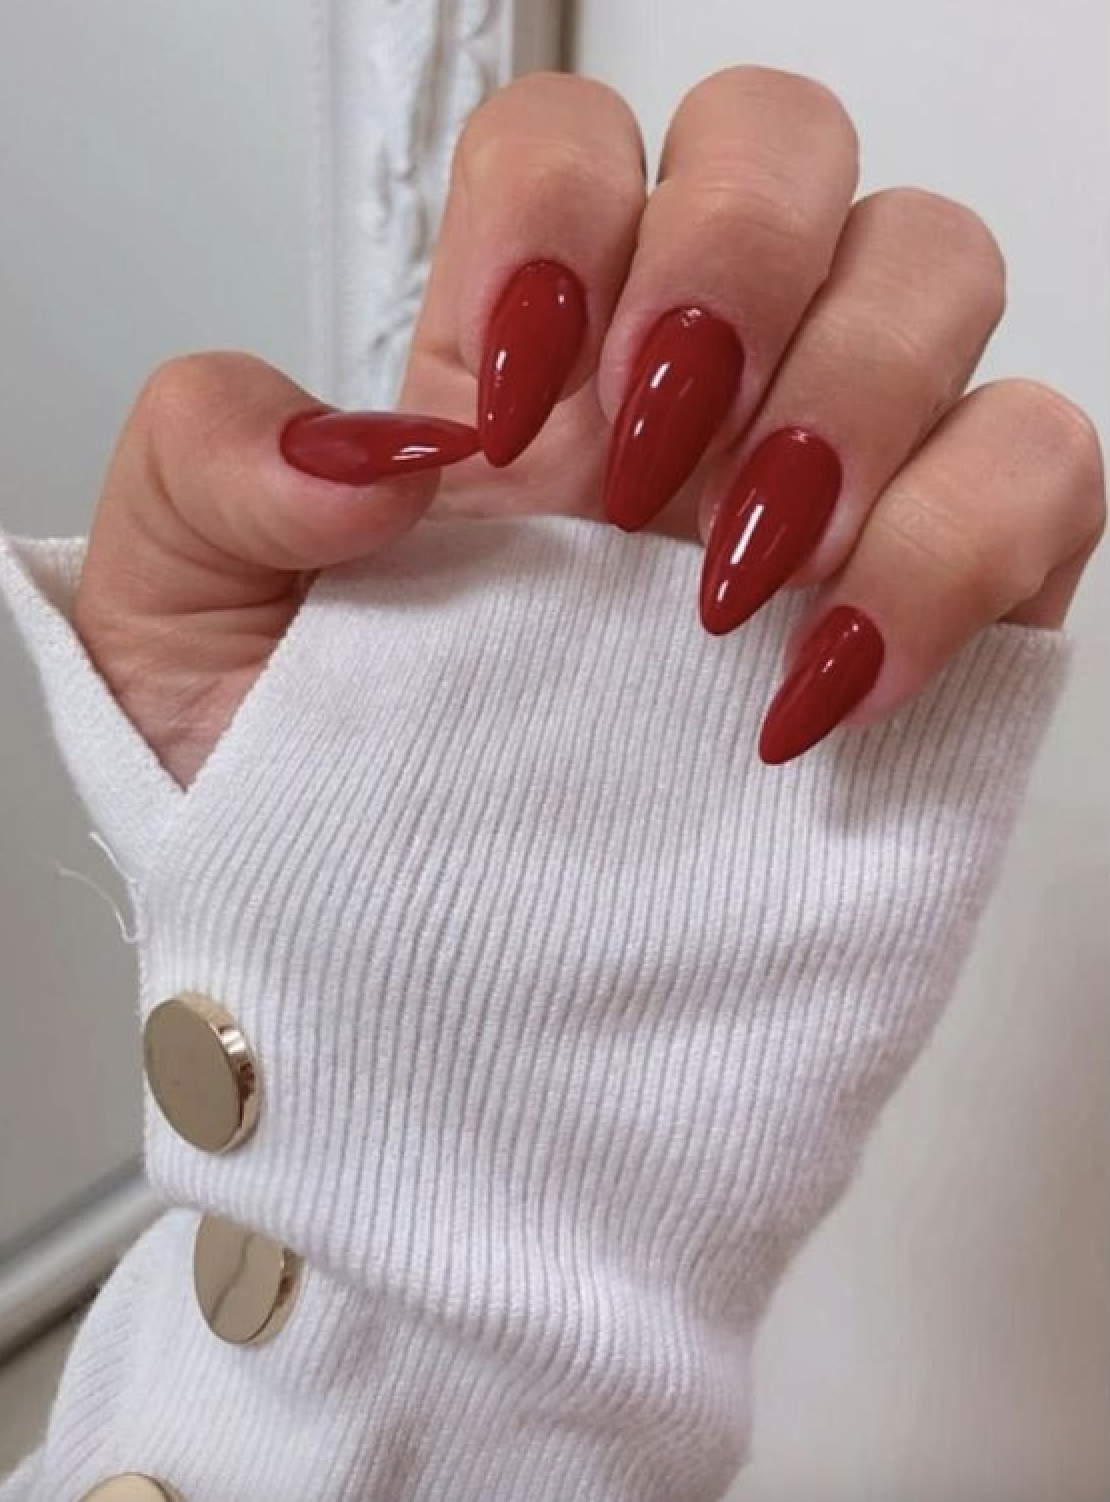 10 Best Red Chrome Nails Review - The Jerusalem Post